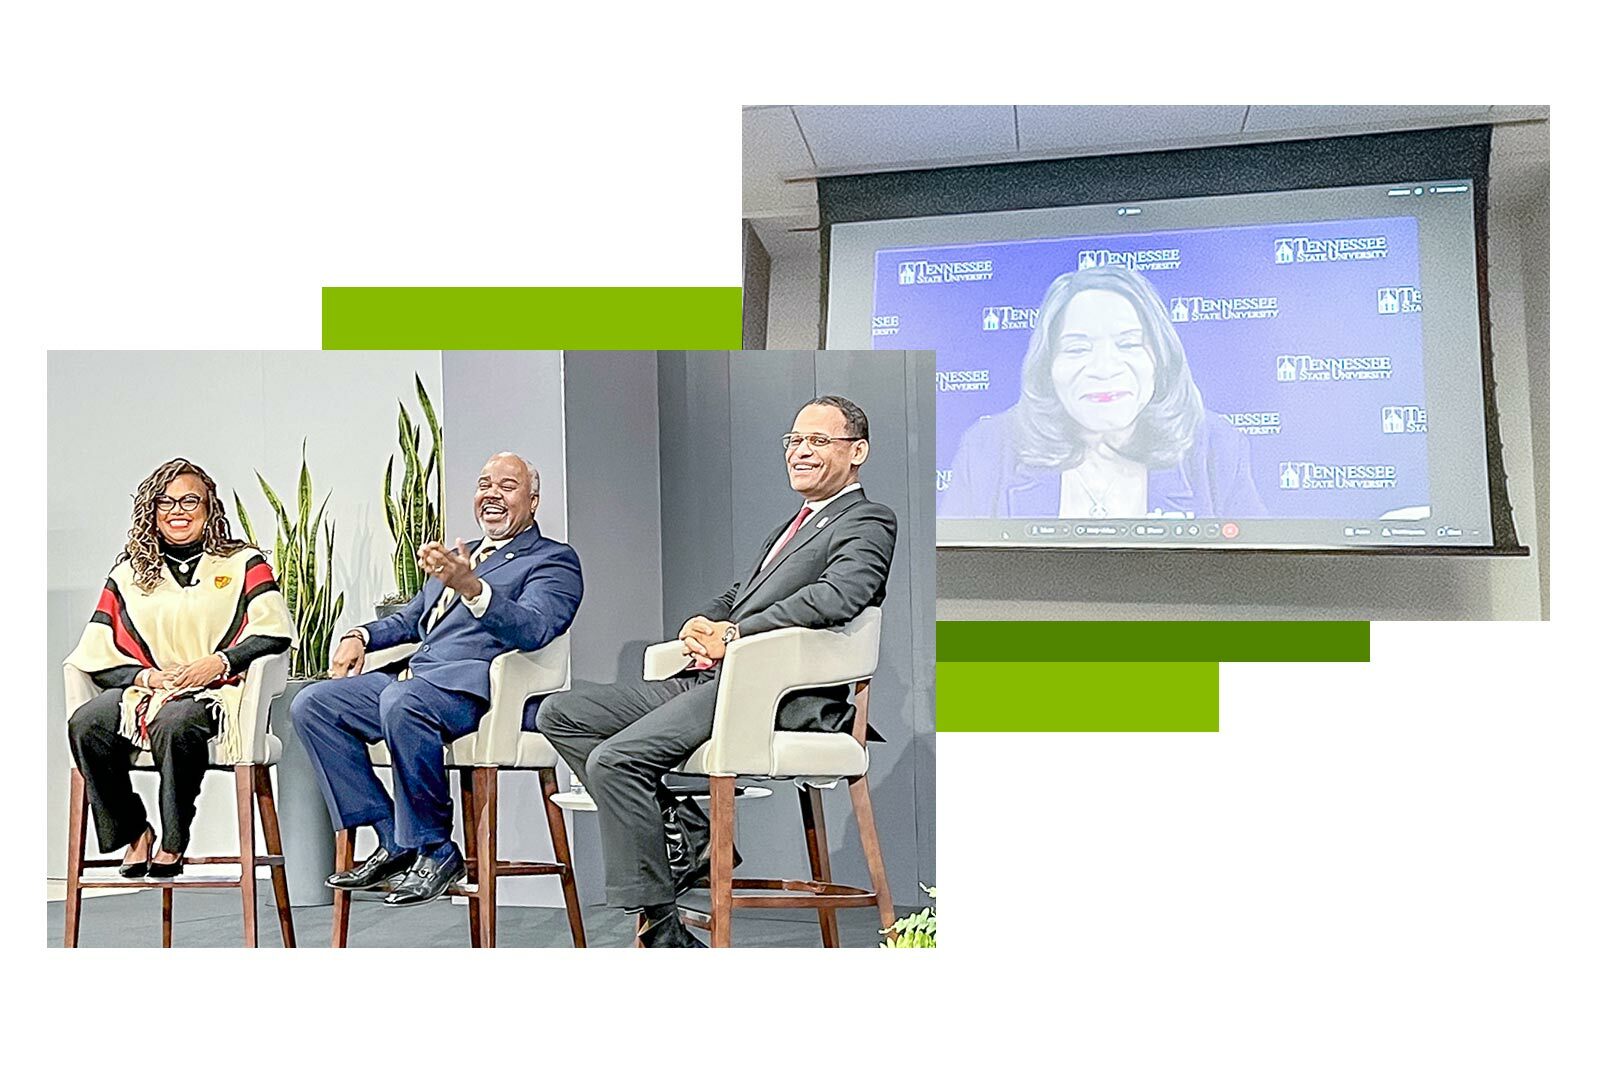 photos of panelists at HBCU presidents event